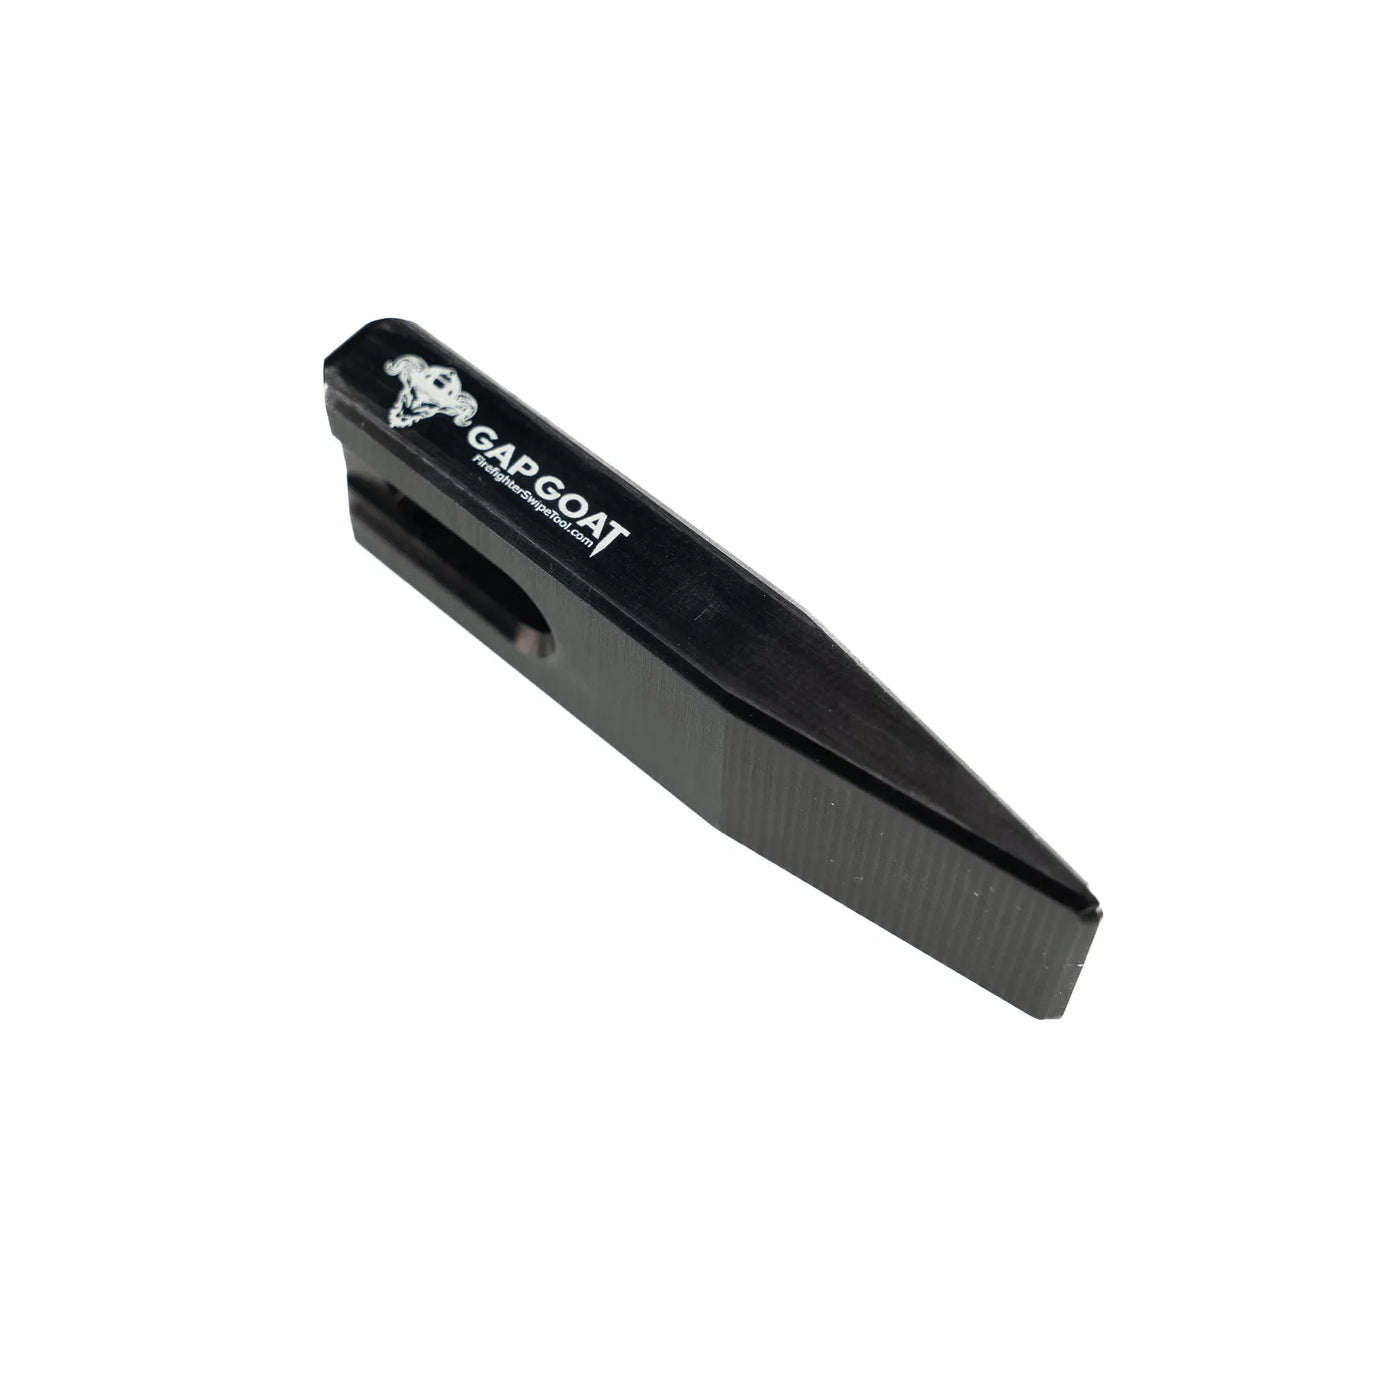 Gap GOAT Mini Forcible Entry Wedge